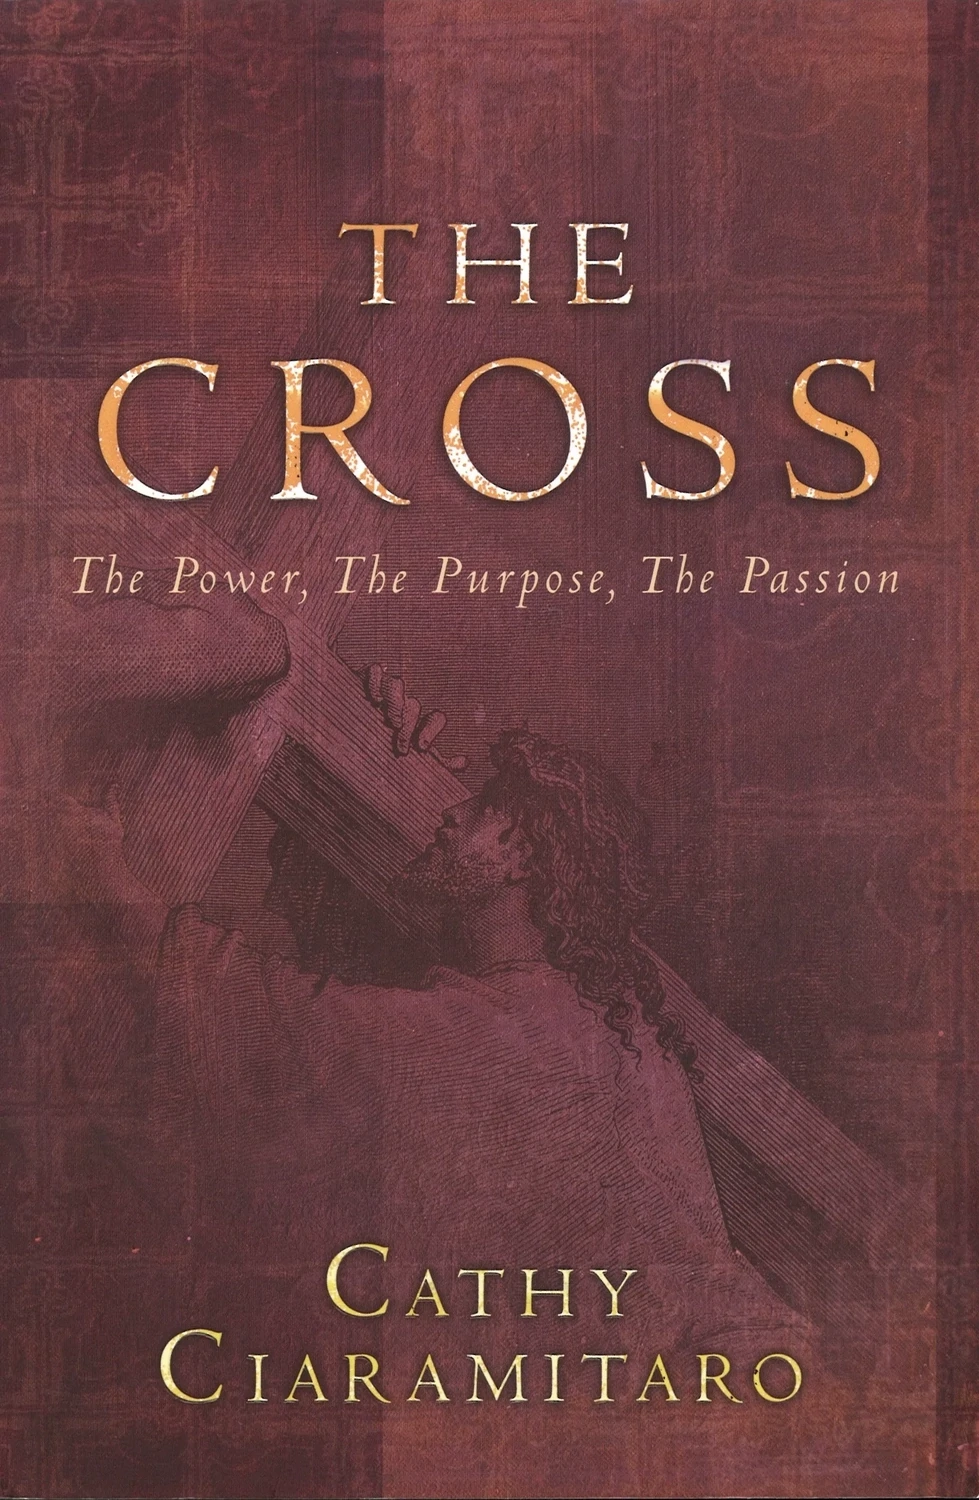 The Cross: The Power The Purpose, The Passion by Cathy Ciaramitaro